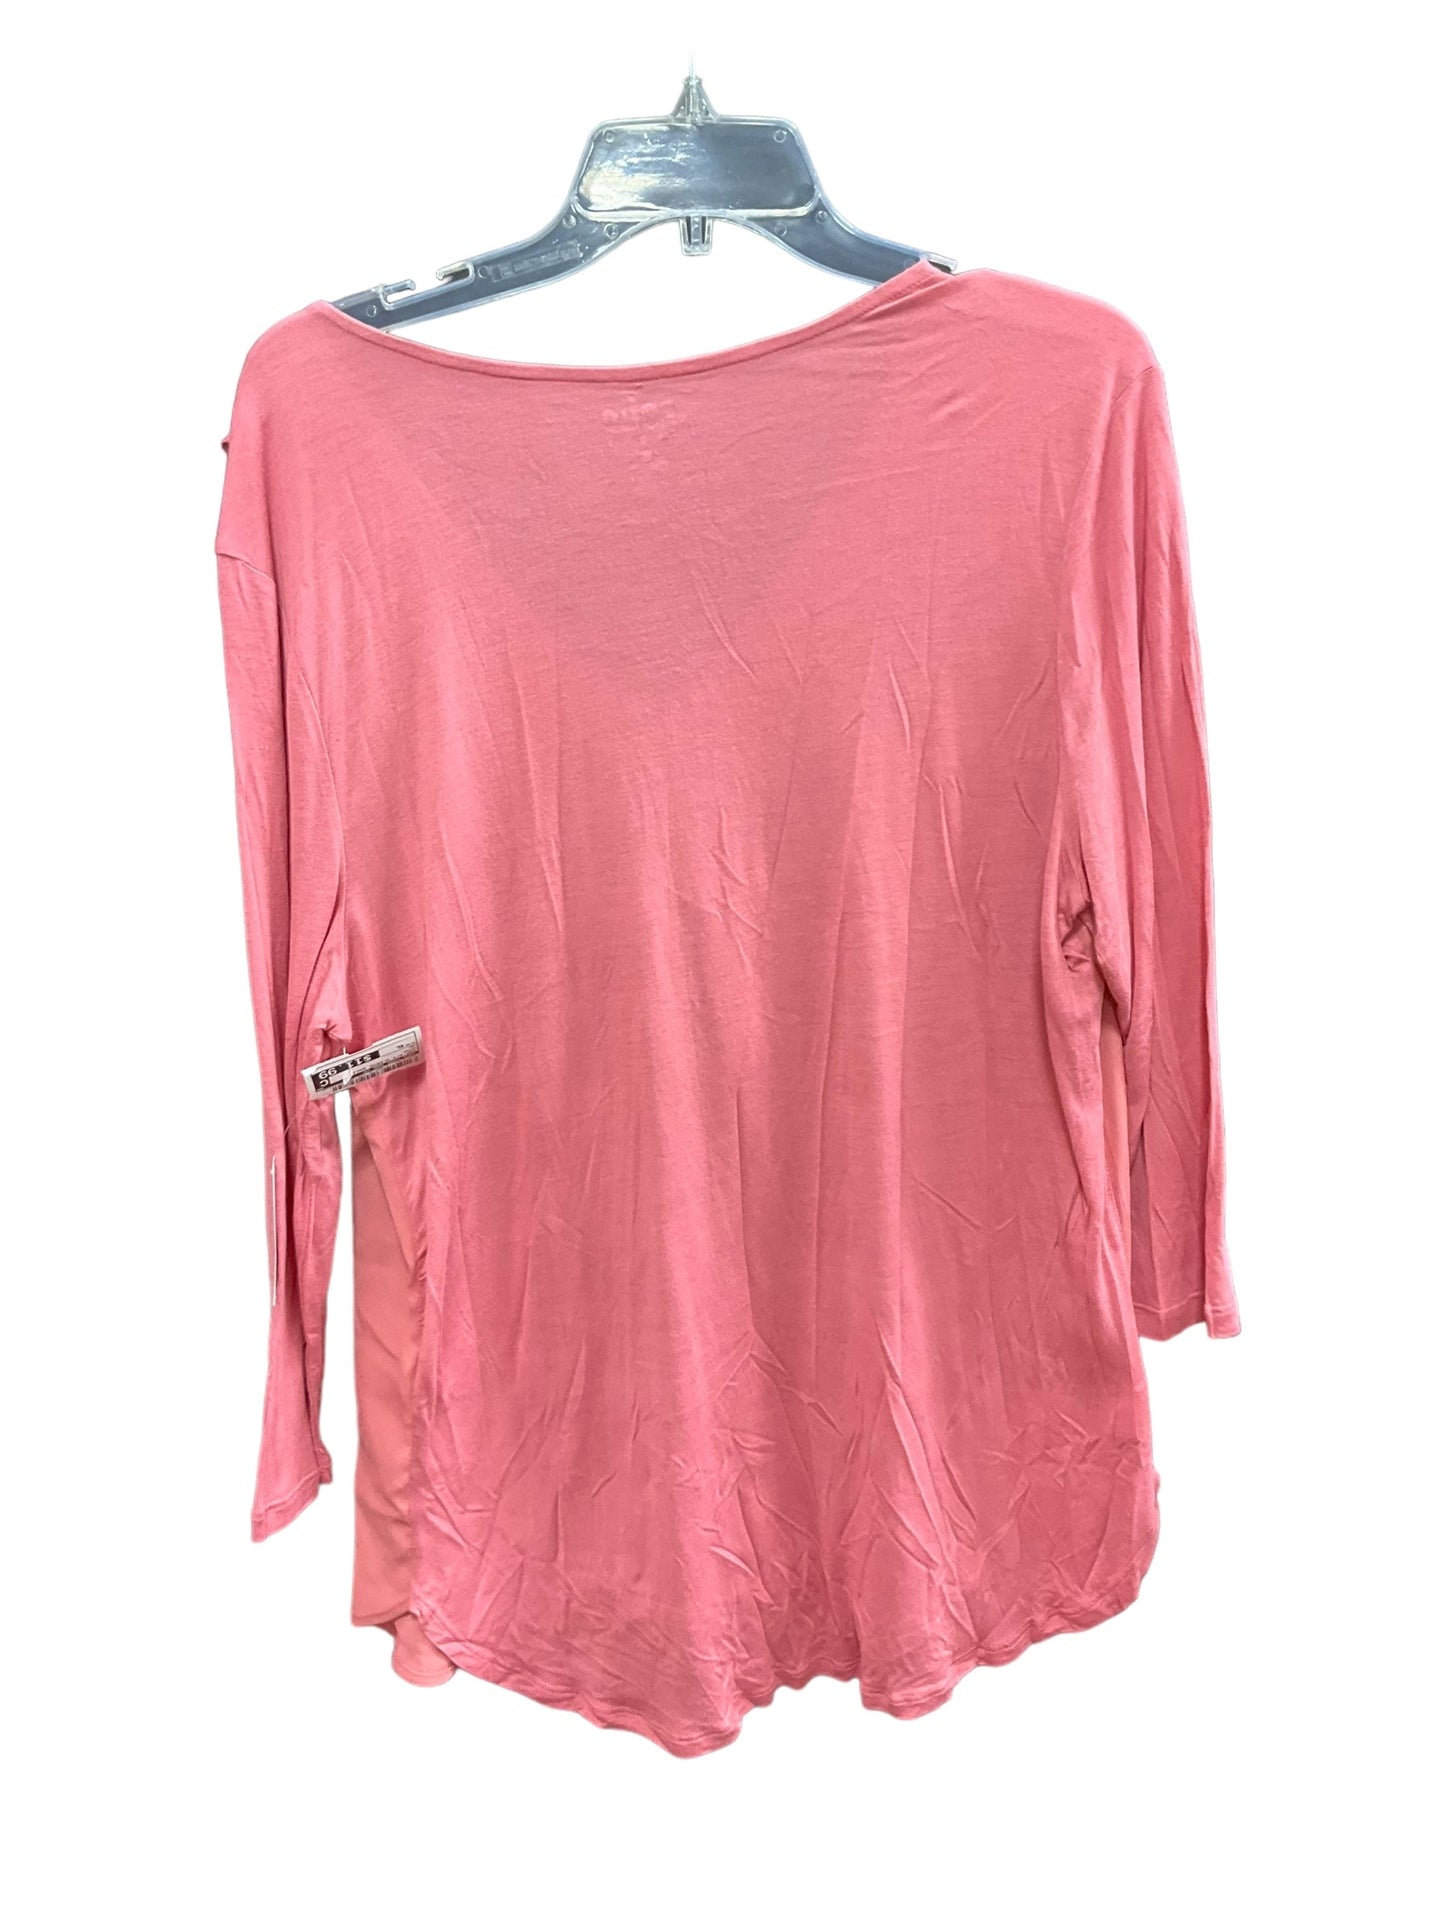 Pink Top 3/4 Sleeve Basic New York And Co, Size Xl